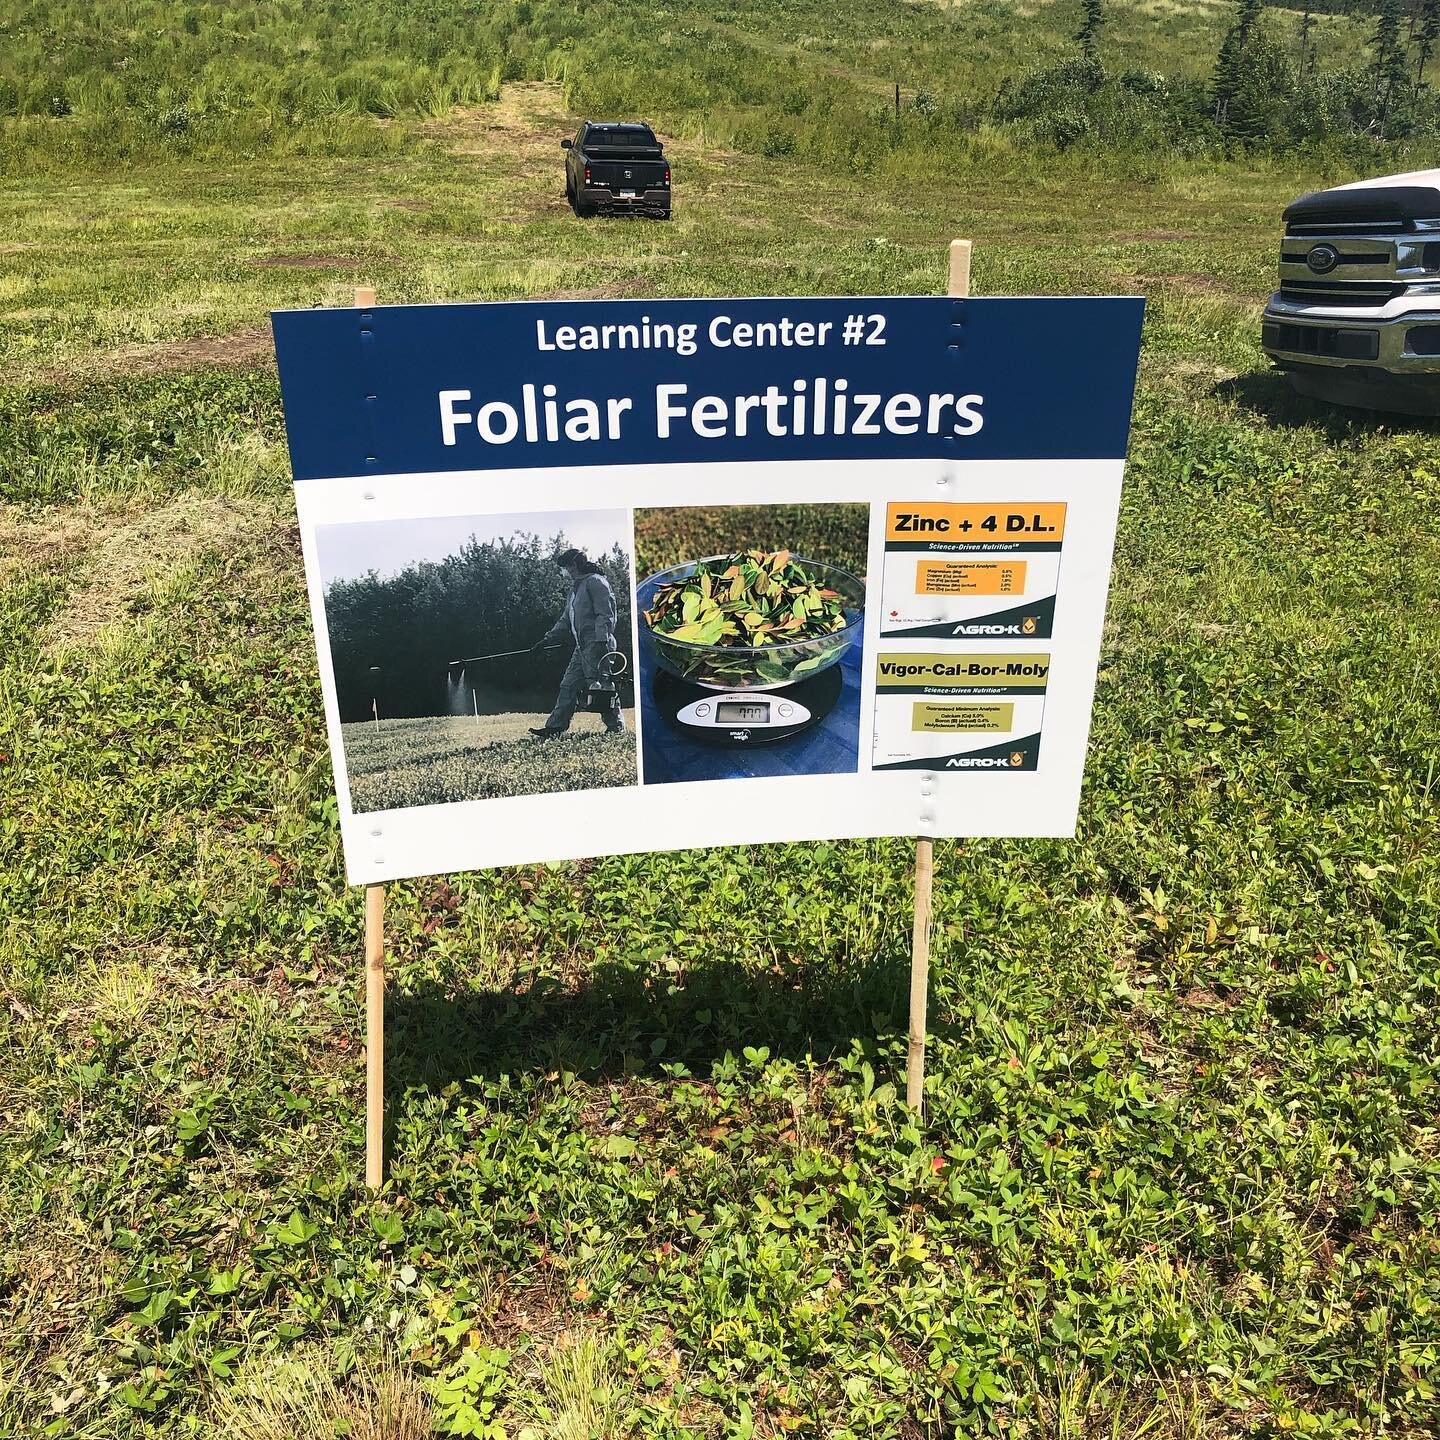 Sneak peek#3 for thurs #blueberryfield day! Learning centerz for weed control- Scott white, Foliars #AgroK, new tech fertilizers @mosaic @yara. Lunch &amp; support provided by @truroagromart